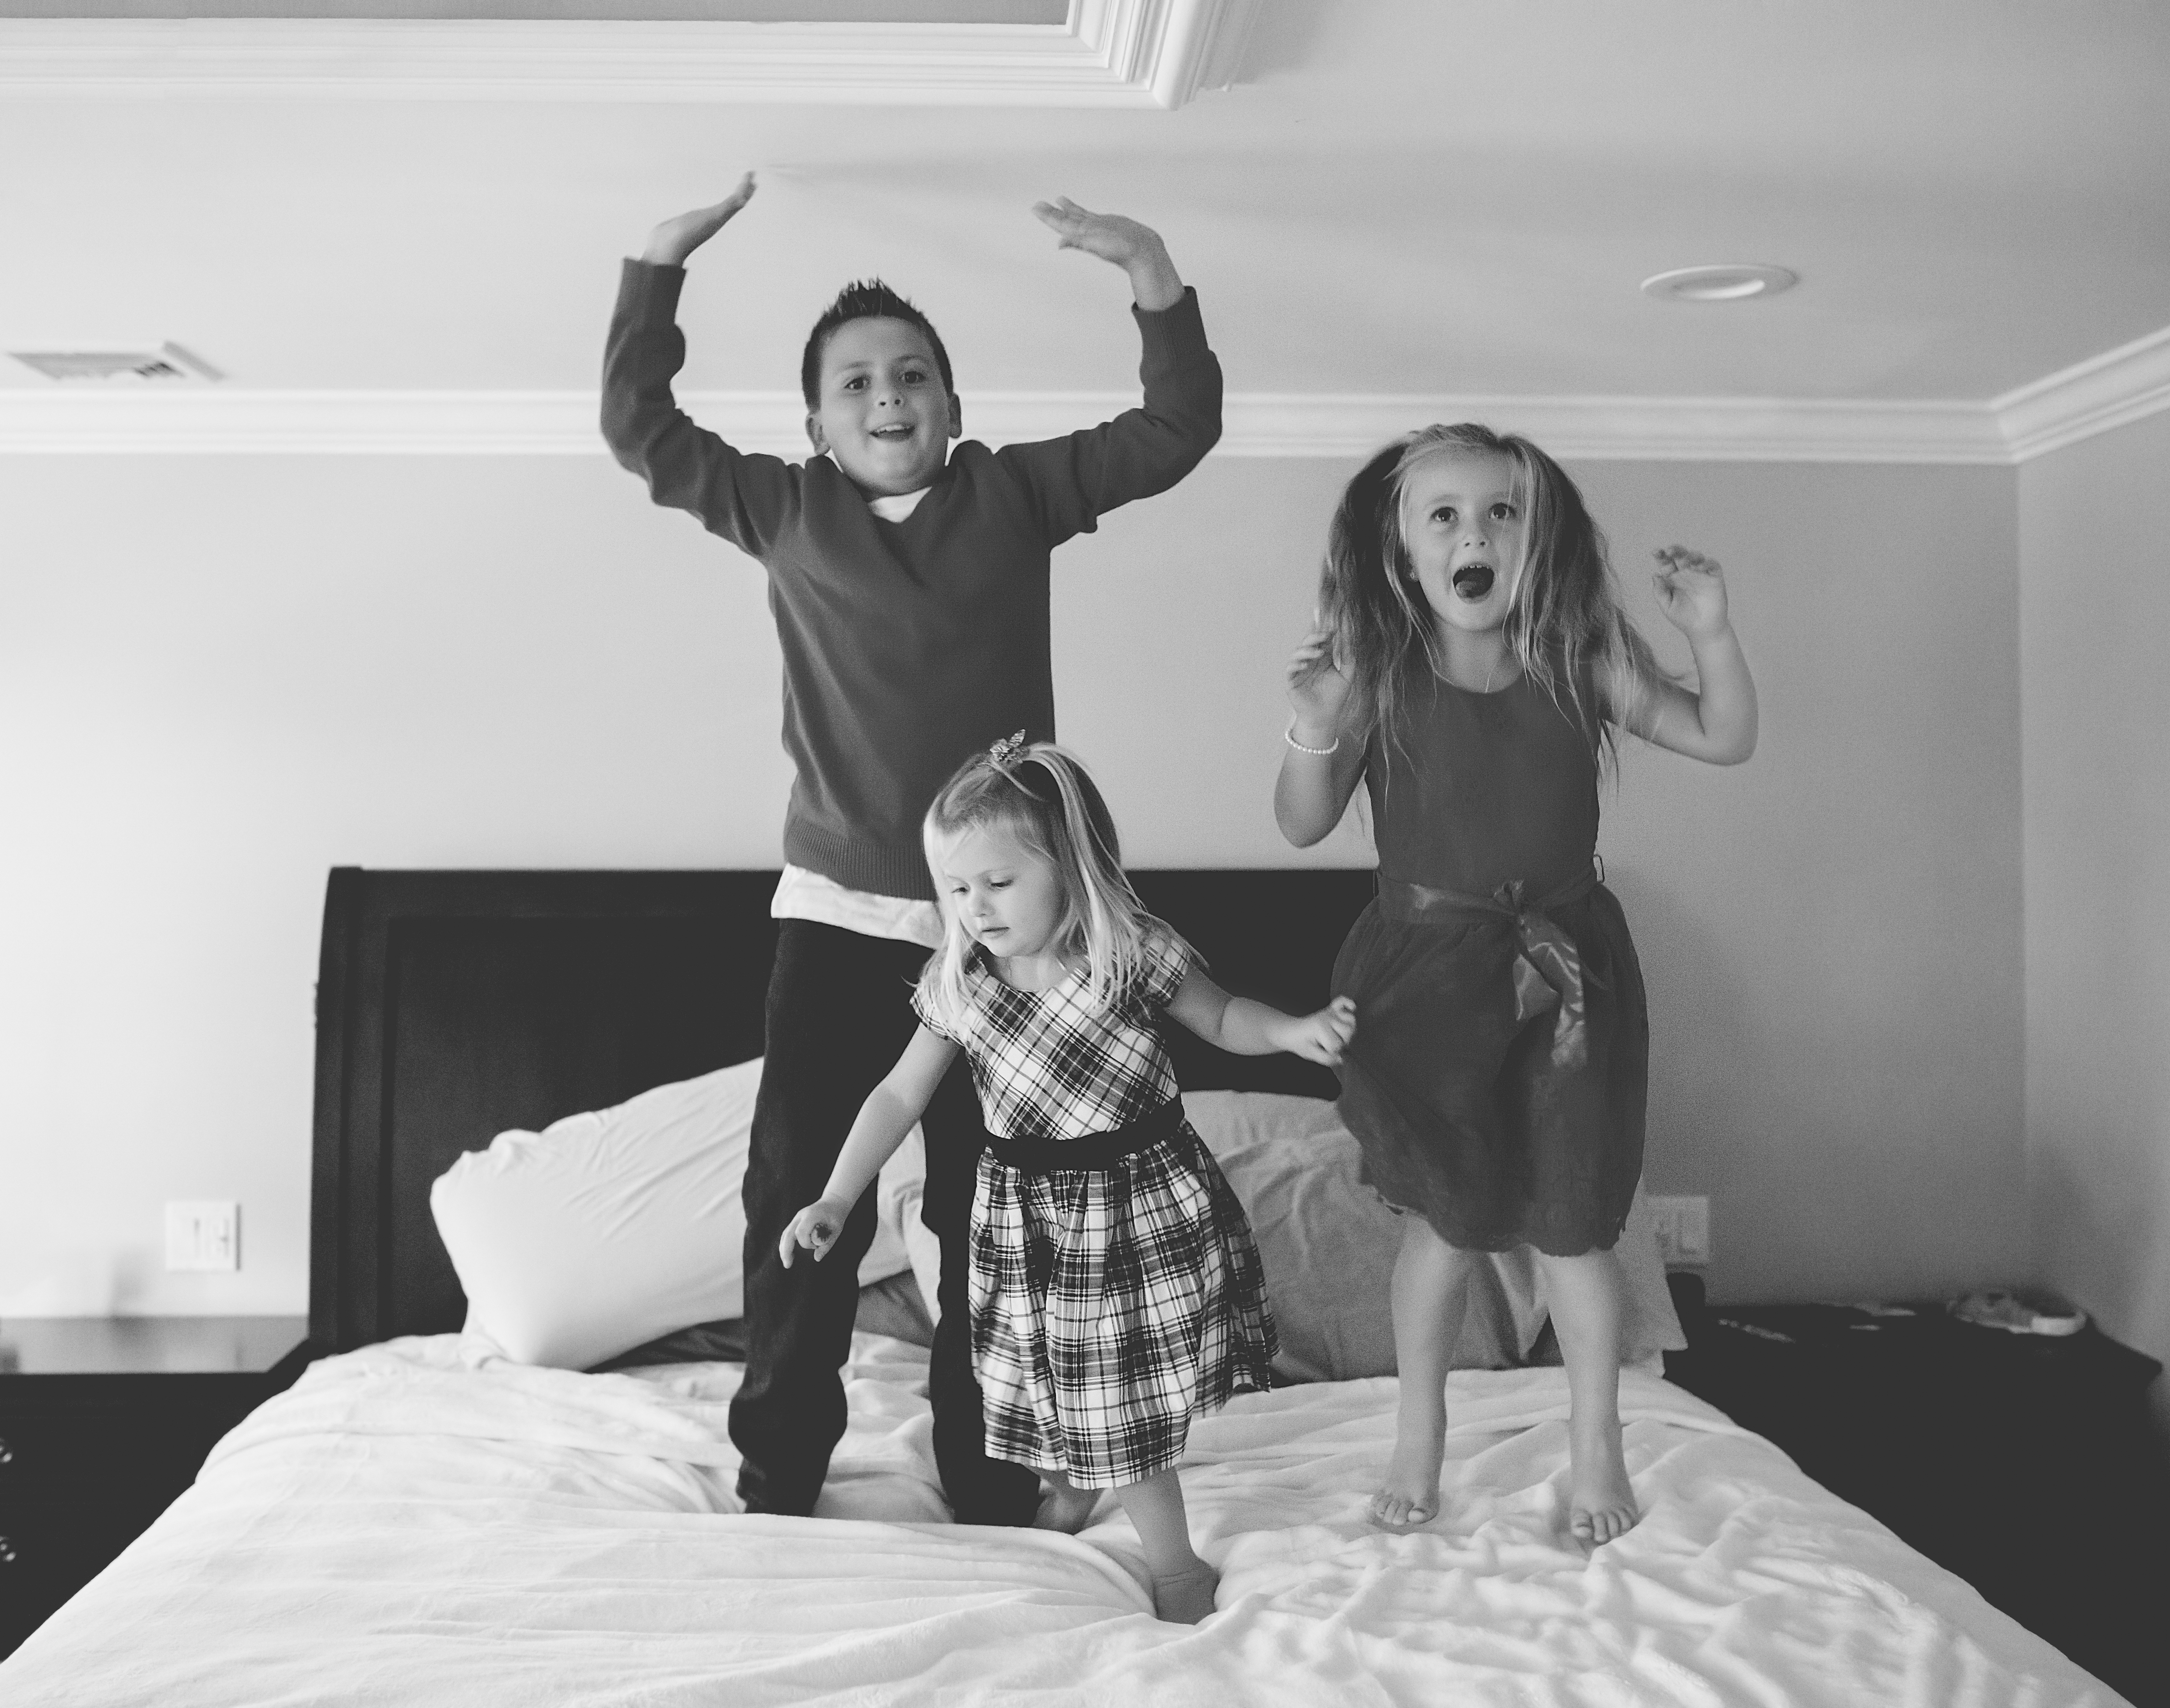 kids jumping on the bed in black and white